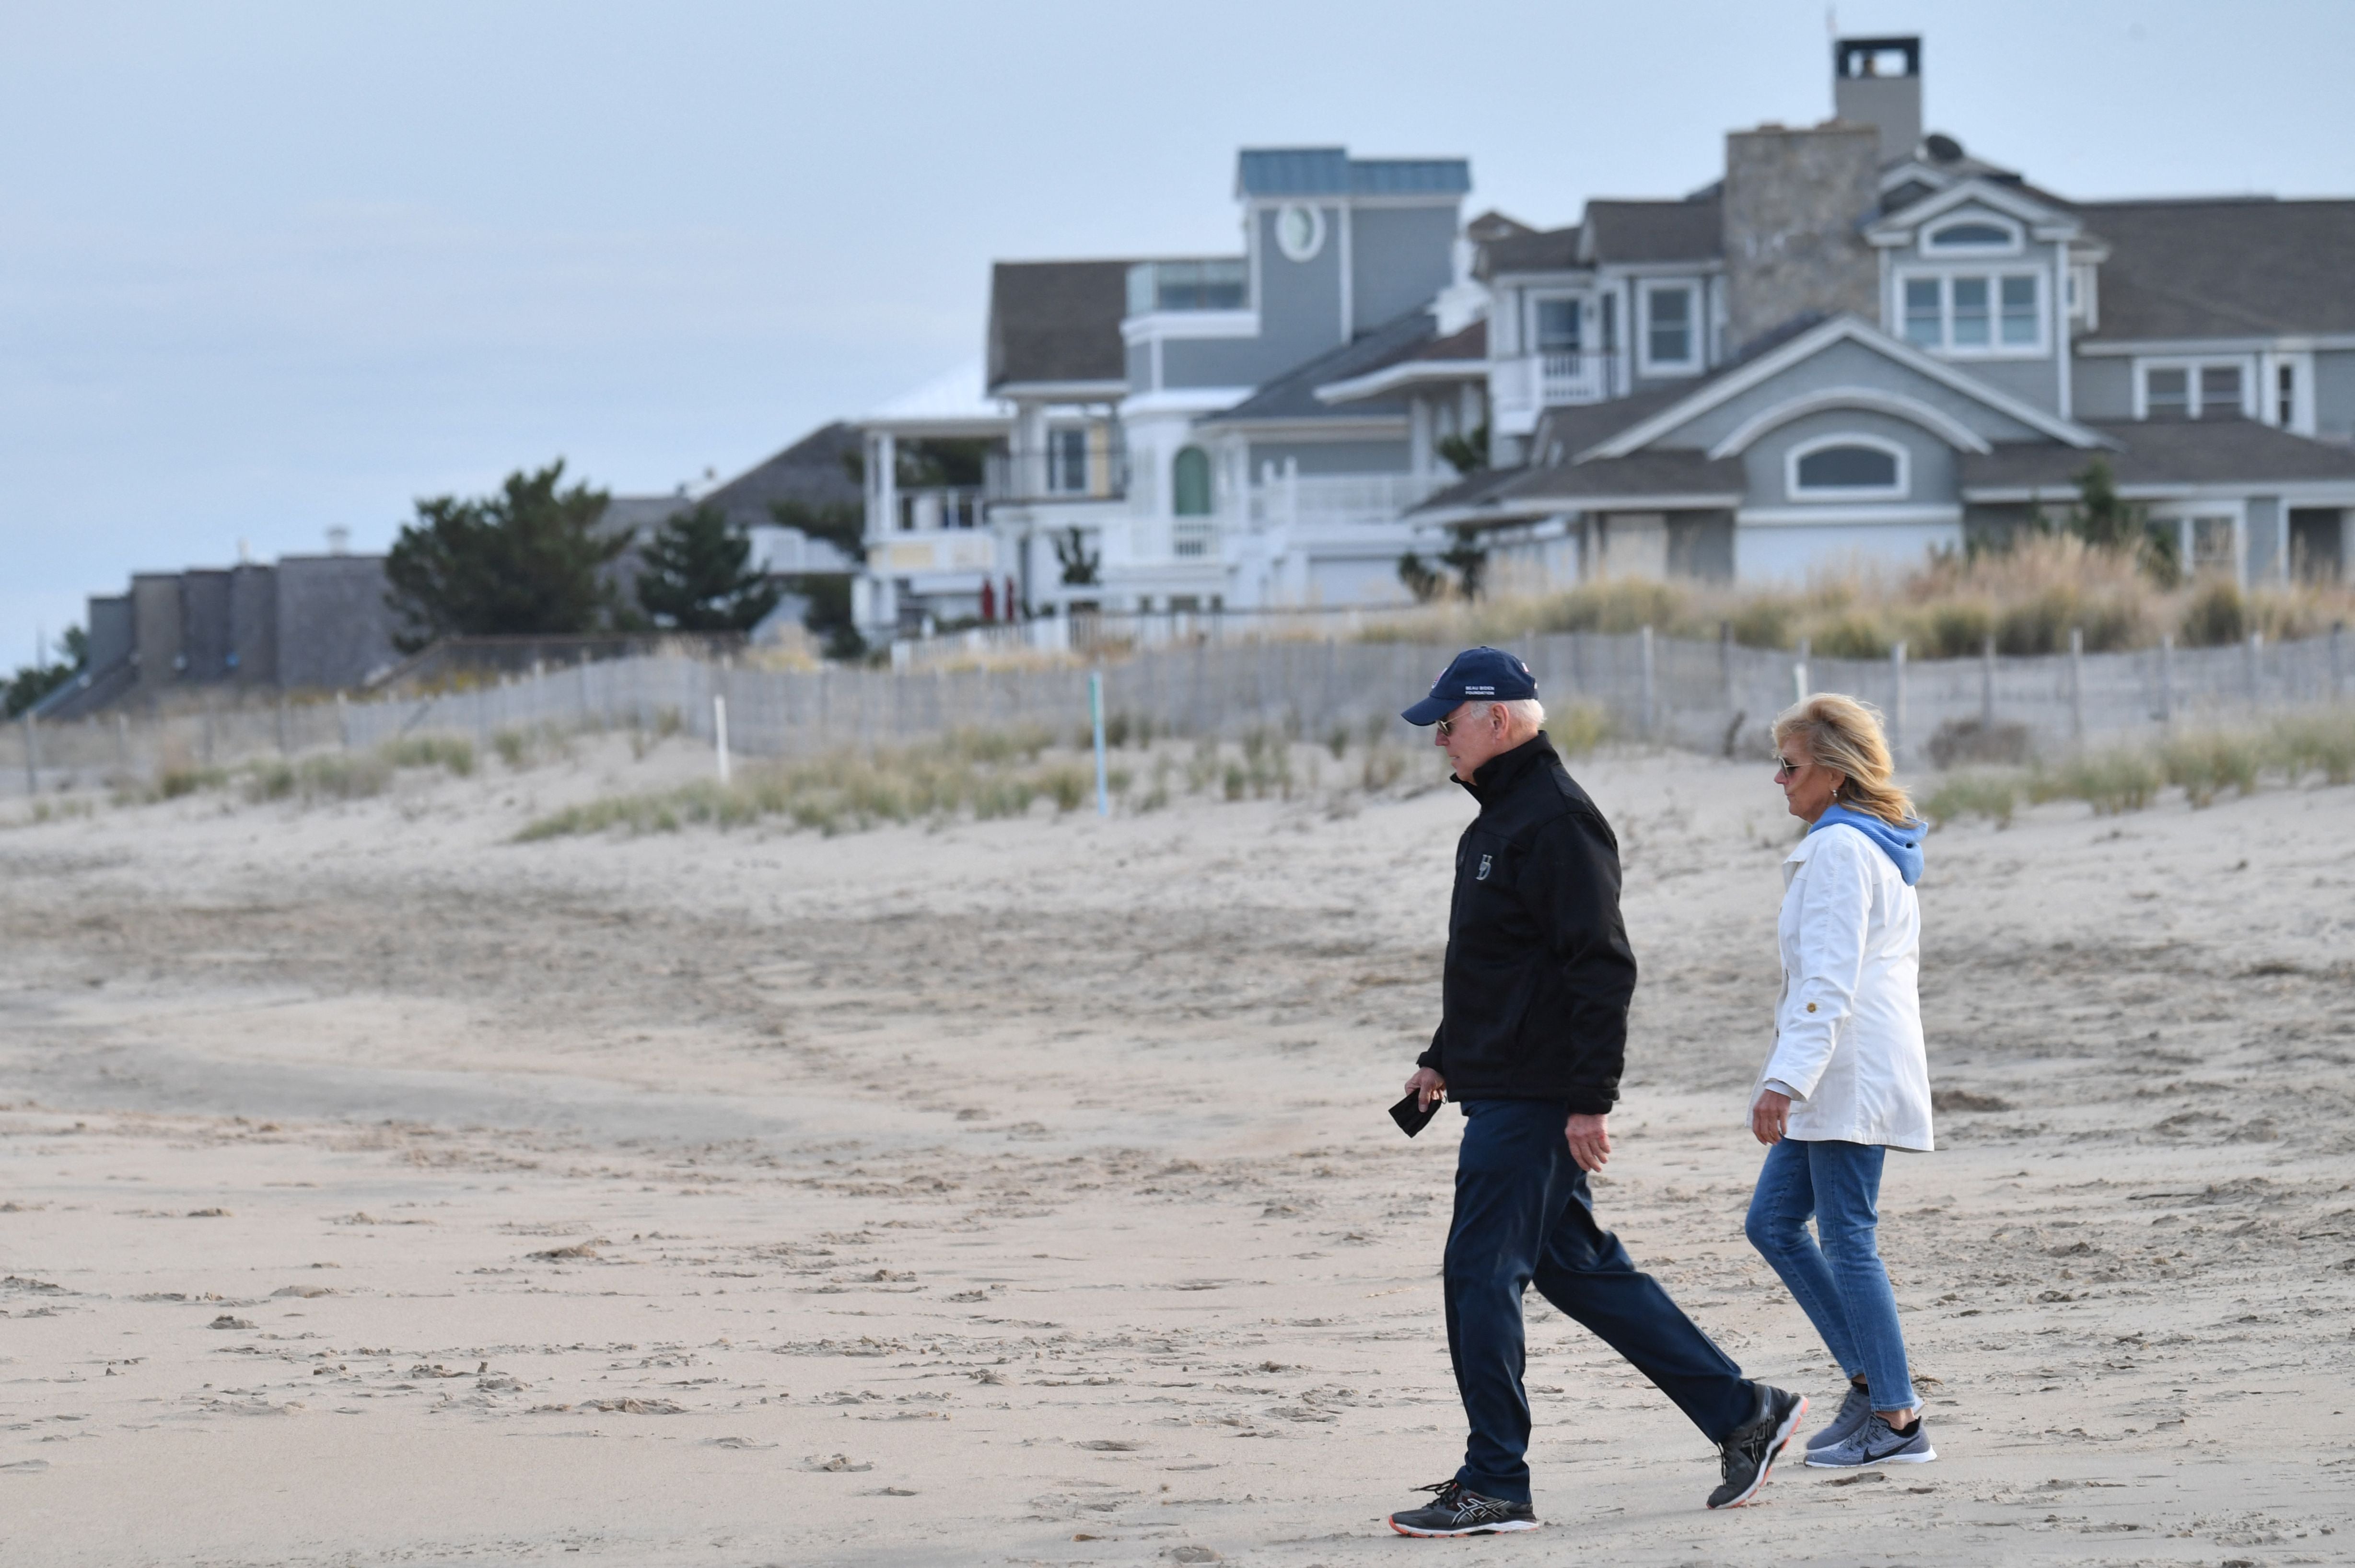 Biden has often visited Rehoboth Beach, Delaware during his time in the White House